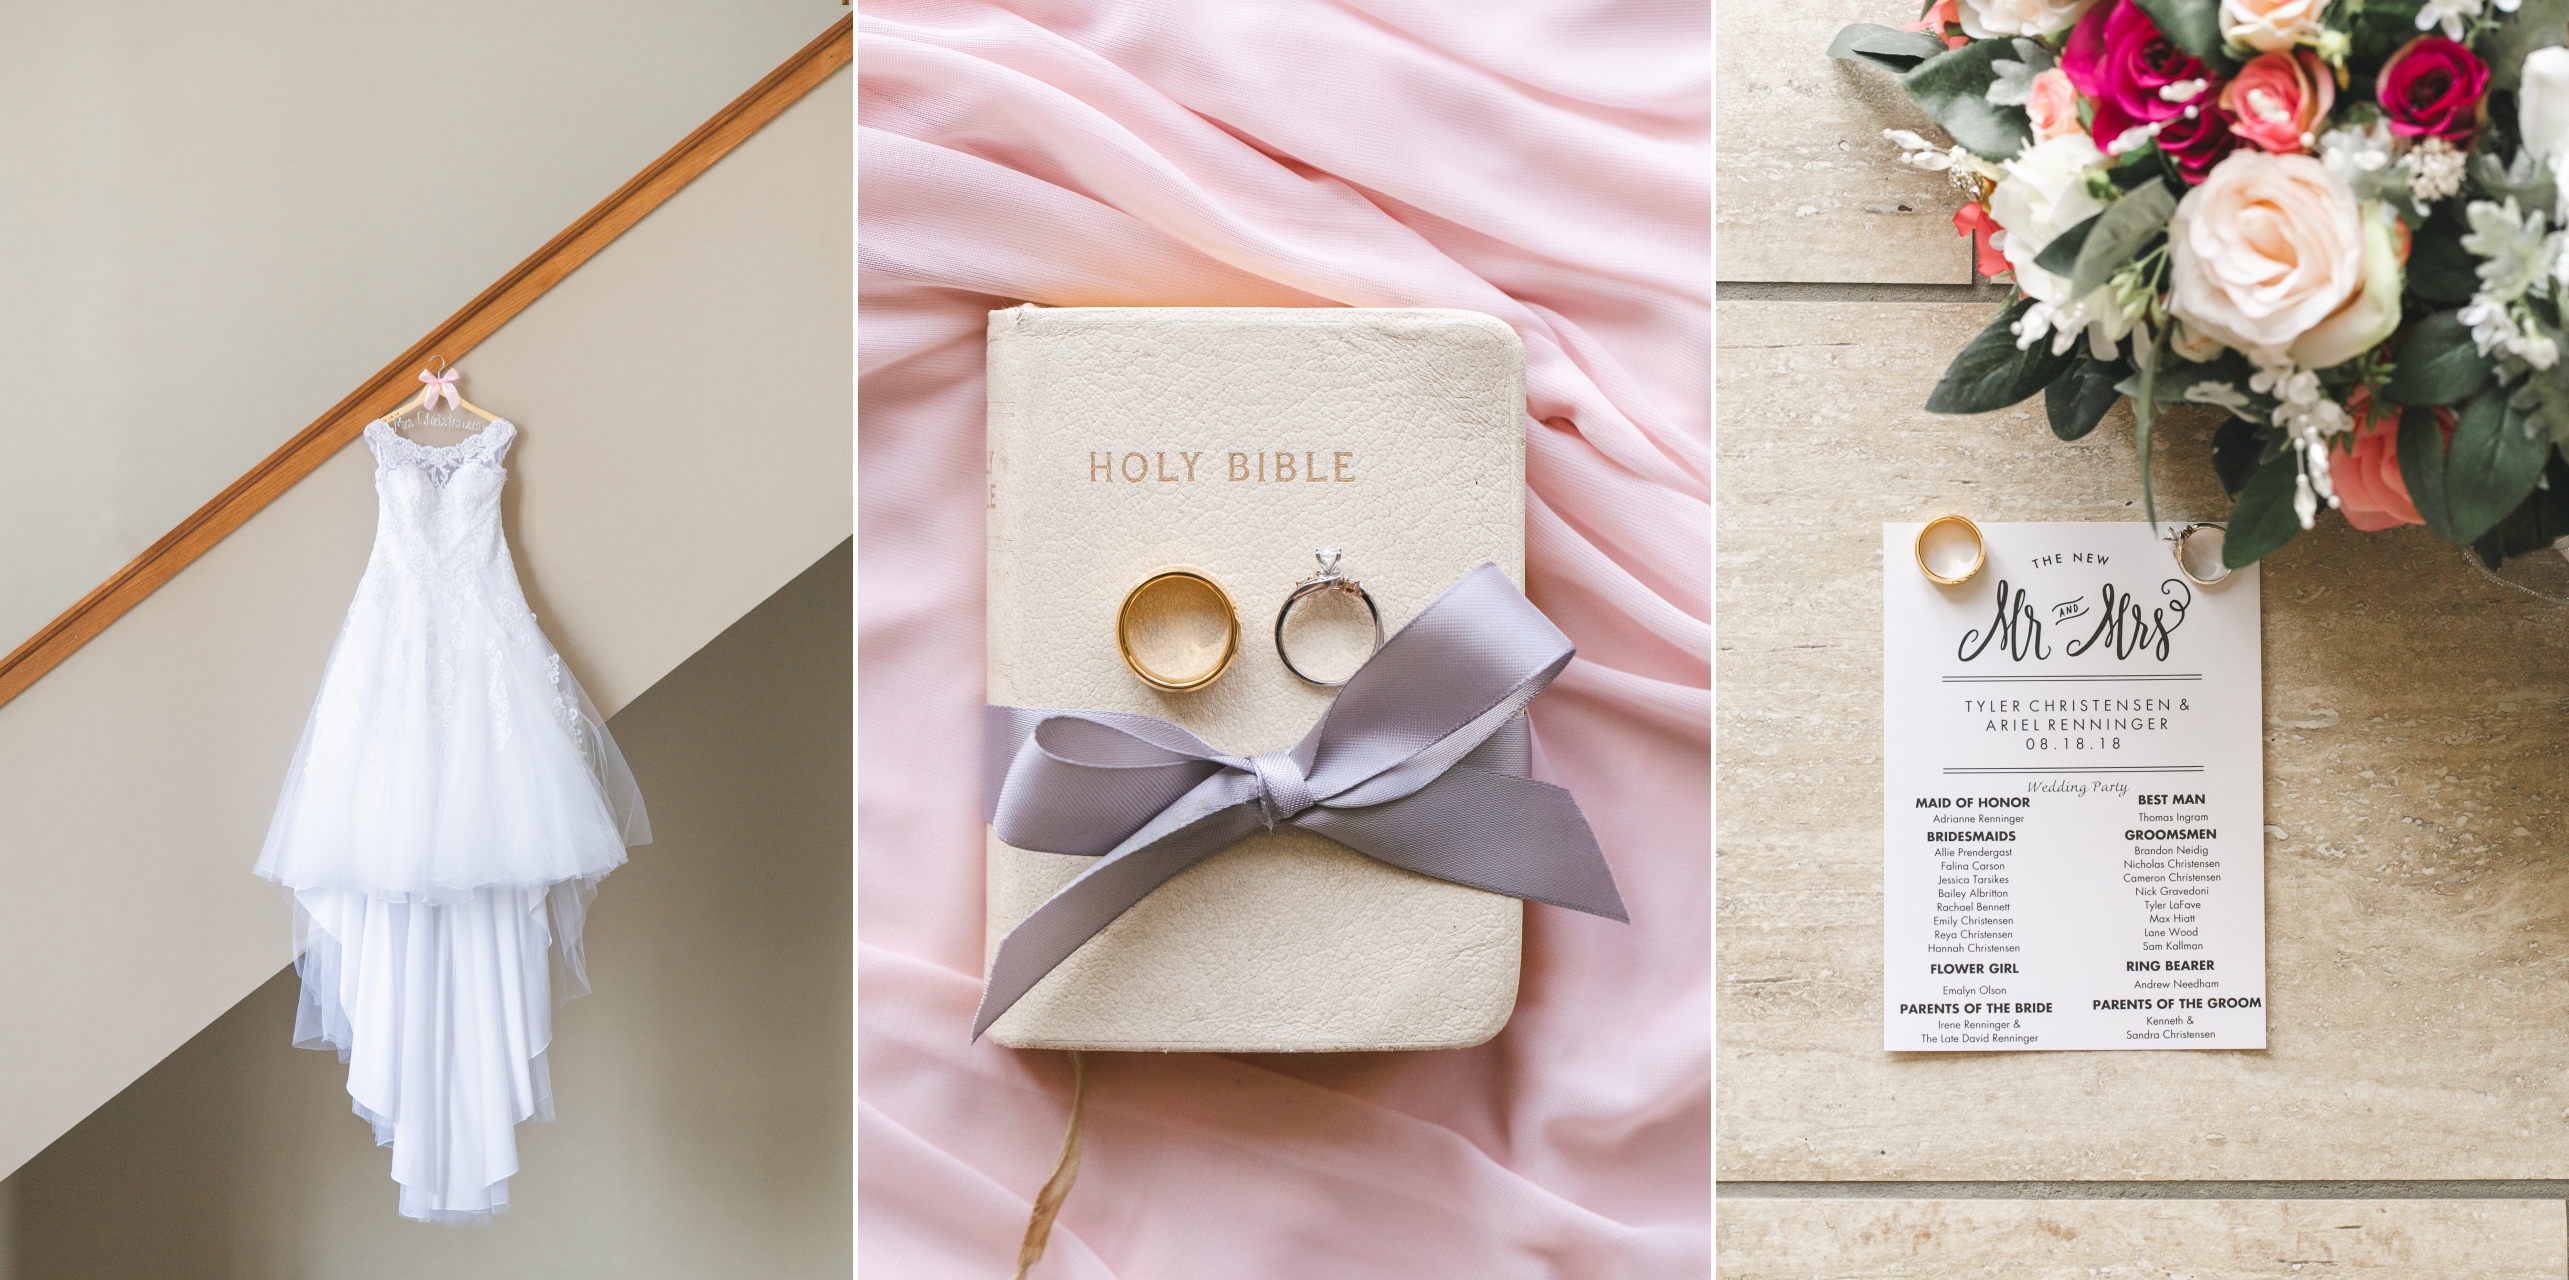 things you need for your wedding: bride's dress, wedding rings, and ceremony programs